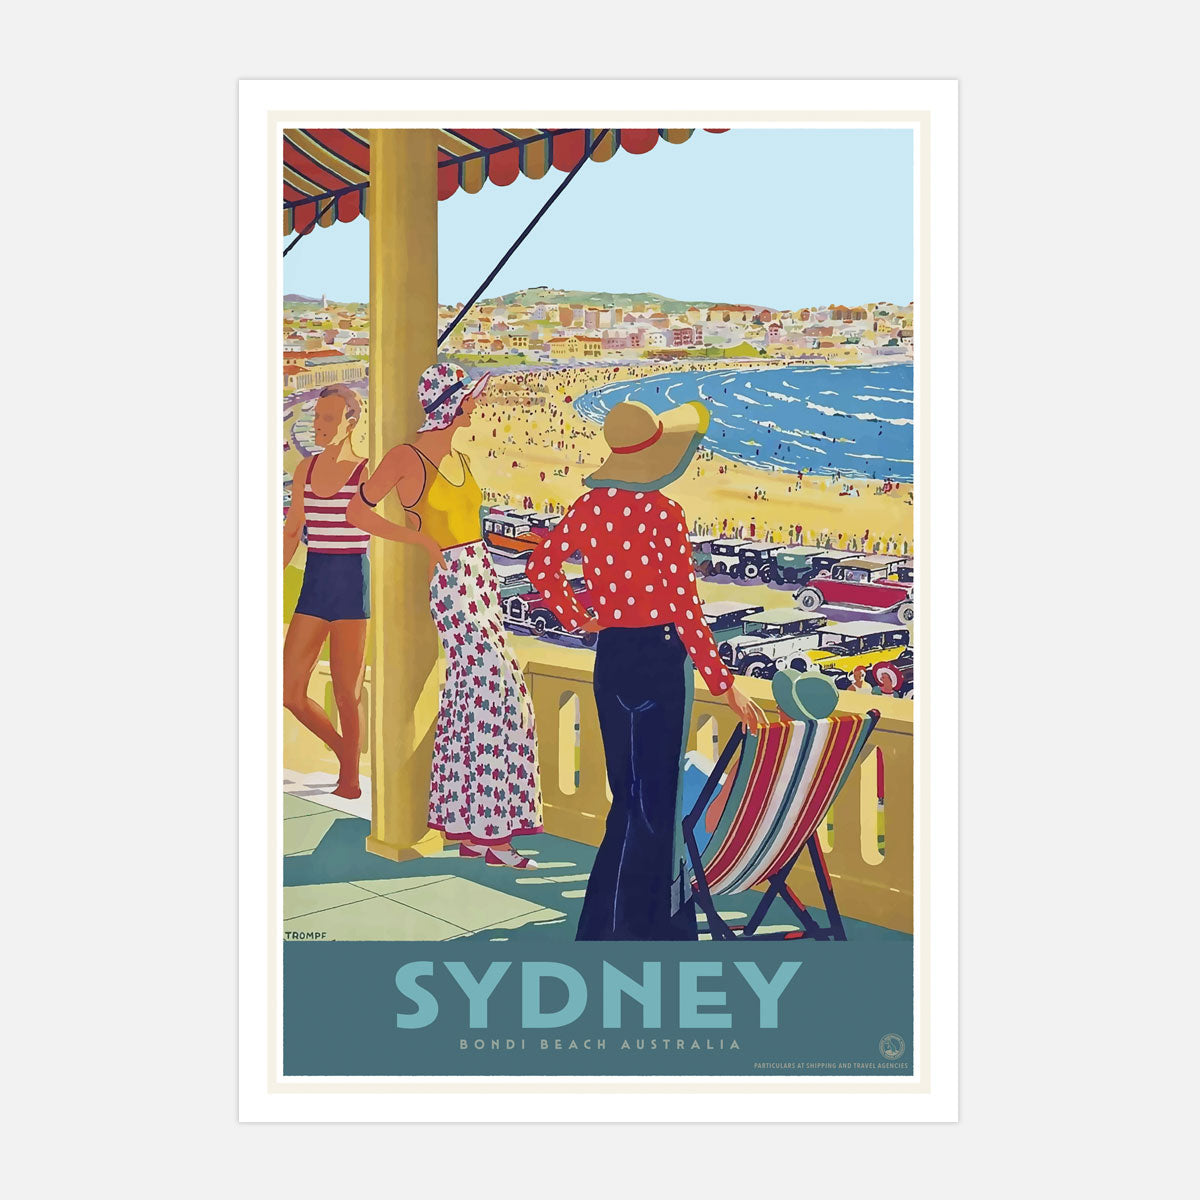 Sydney Australia vintage advertising poster print from PLaces We Luv